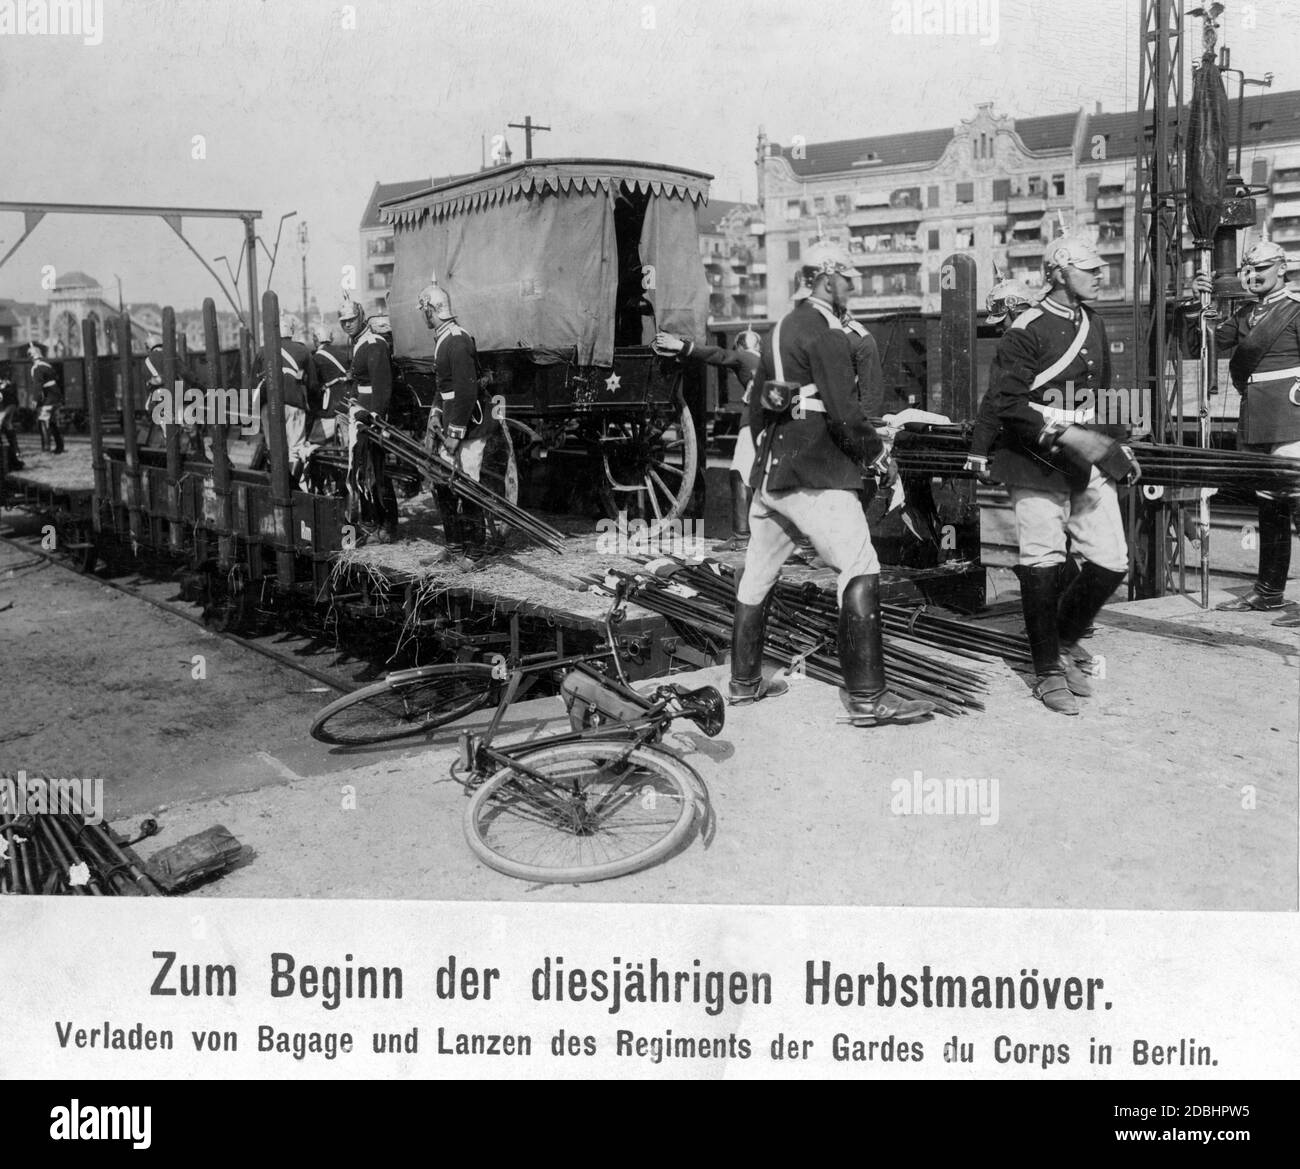 Loading of baggage and lances of the regiment of the Gardes du Corps in Berlin. Stock Photo